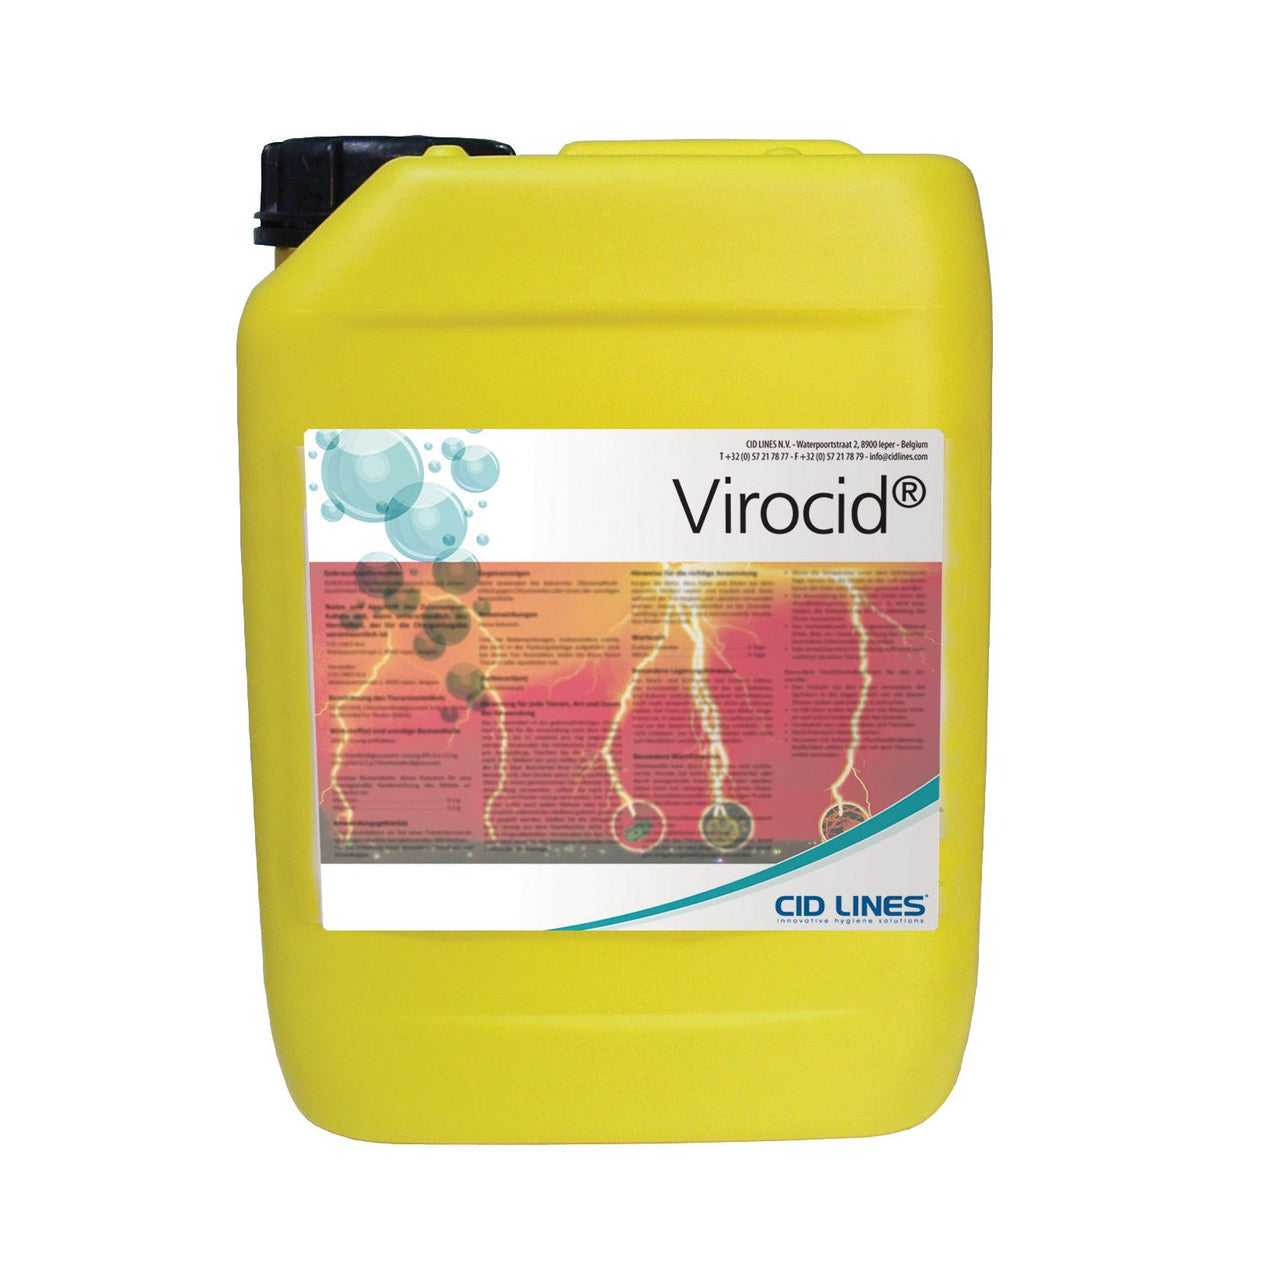 Virocid Concentrated Disinfectant - 1.33 Gallons